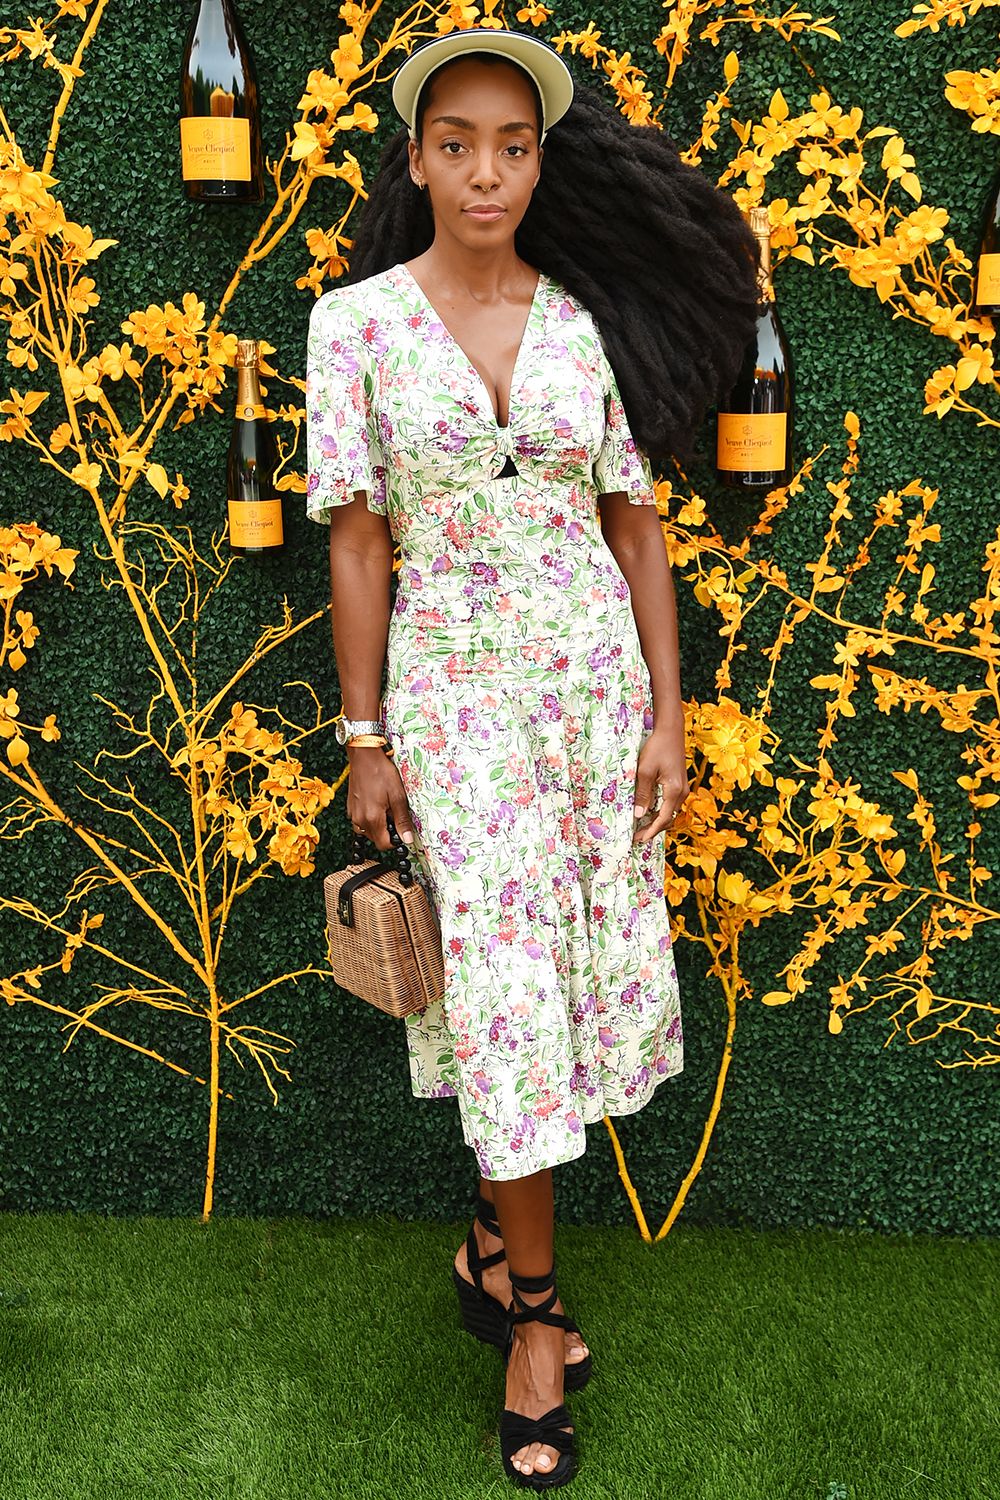 Veuve Clicquot Polo Classic Outfits 2019: 15 Looks We Love | Who What Wear